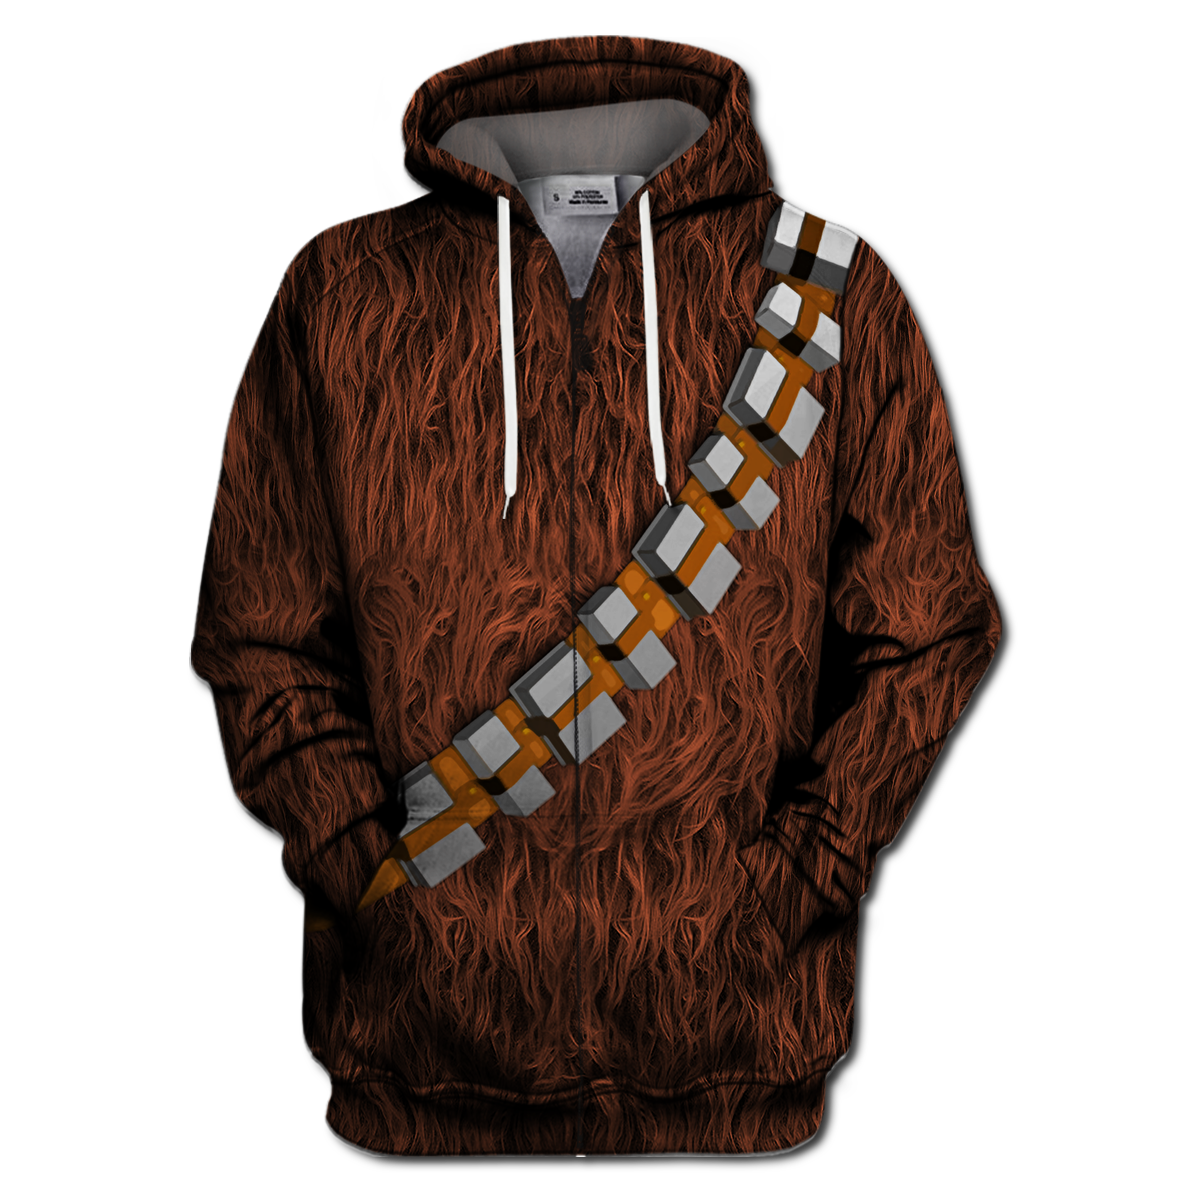 Unifinz SW T-shirt Chewbacca Limited 3D Print Costume T-shirt Amazing SW Hoodie Sweater Tank 2023